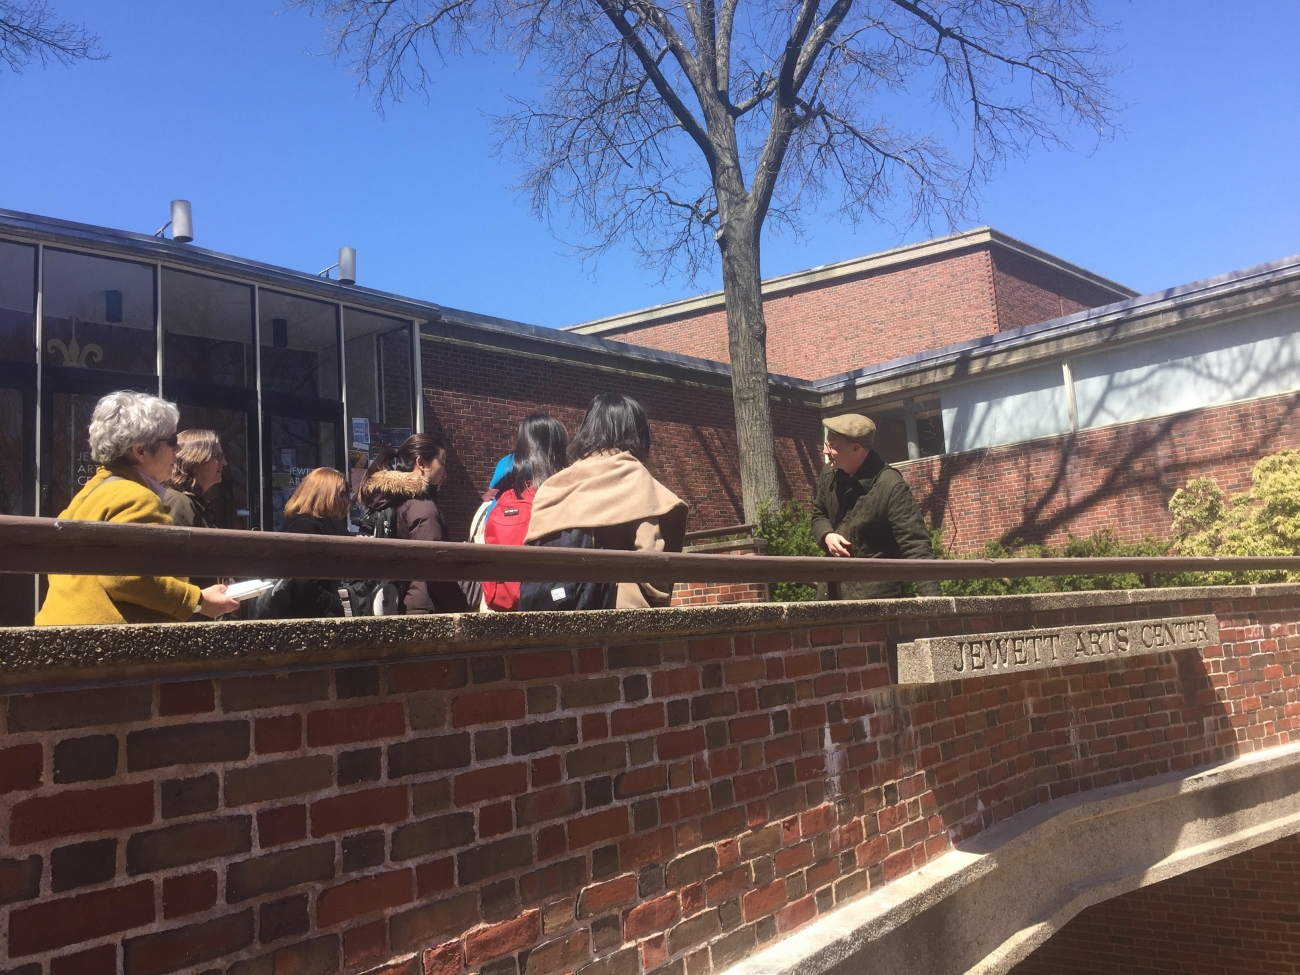 exterior image of the Jewett Arts Center with Professor Friedman and students visible